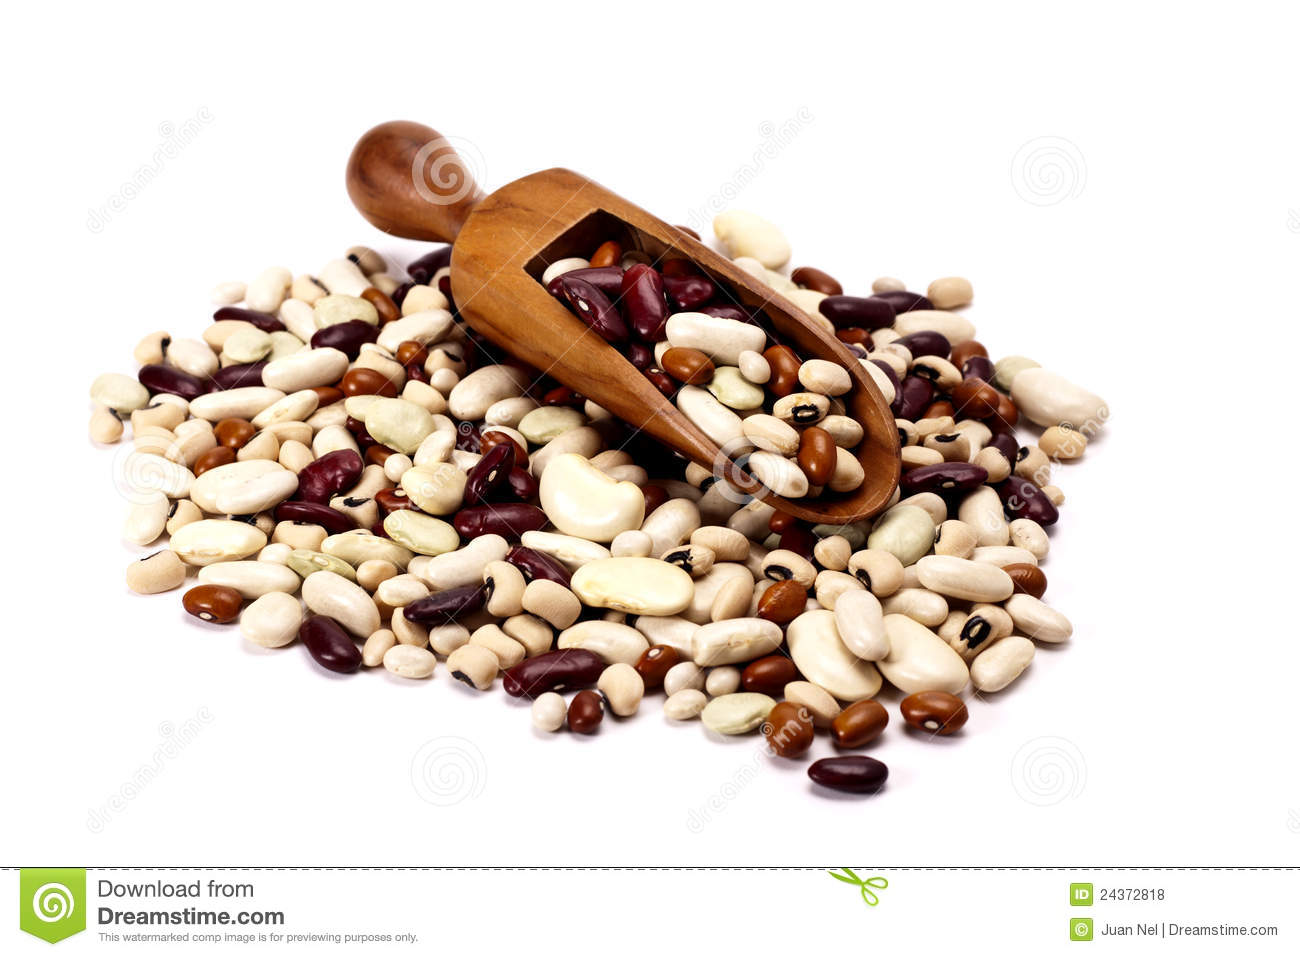 Dried Mixed Beans  Royalty Free Stock Photos   Image  24372818